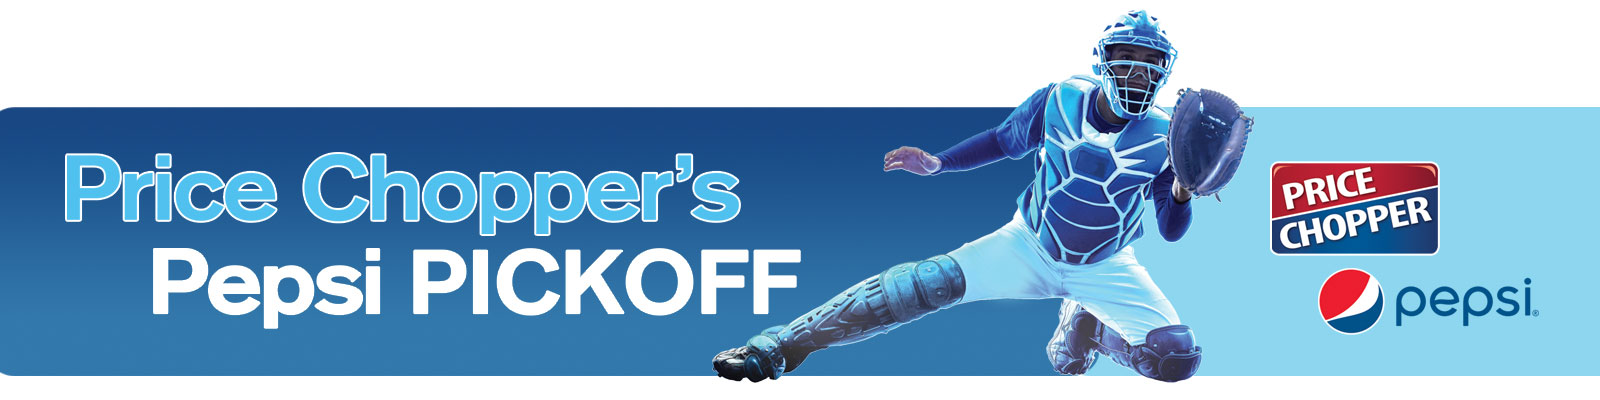 Price Chopper's Pepsi Pickoff Promotion with the Kansas City Royals. Learn More